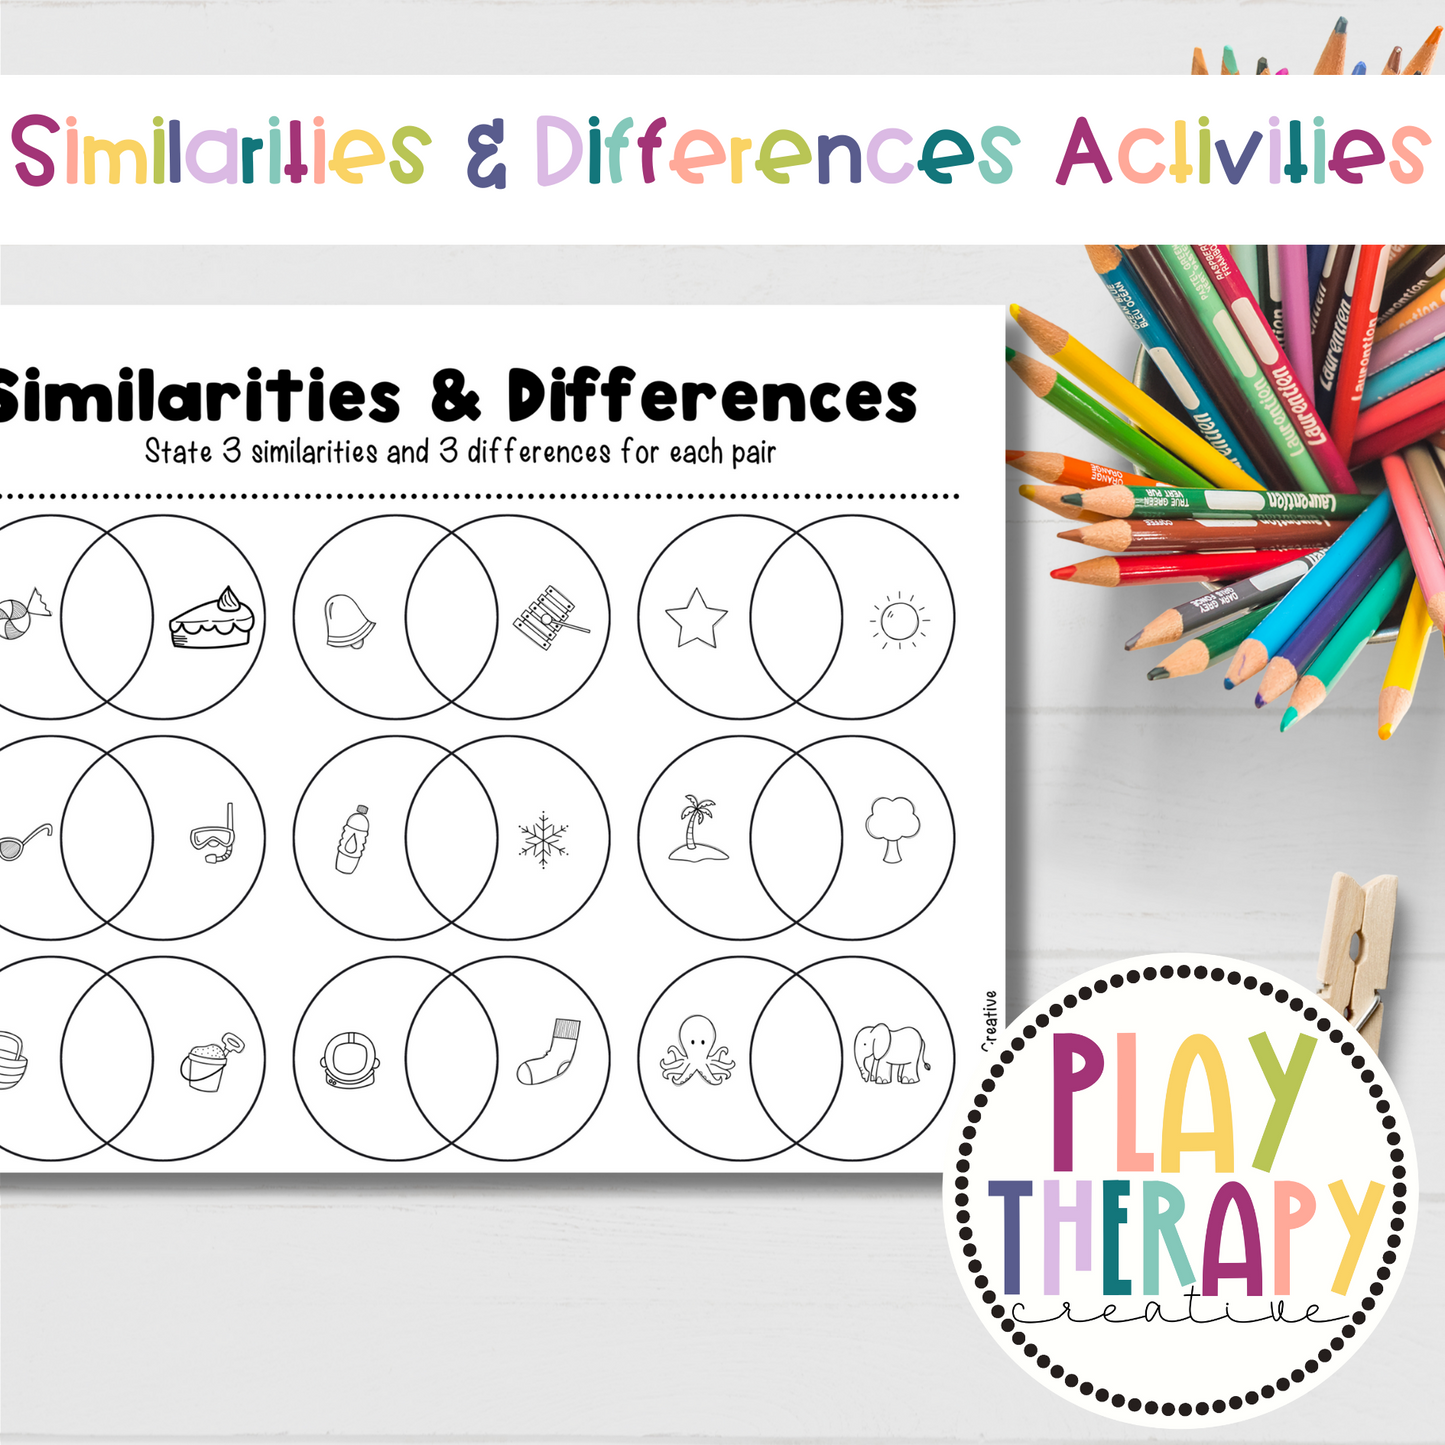 Similarities & Differences / Compare & Contrast Worksheet for Speech & Language